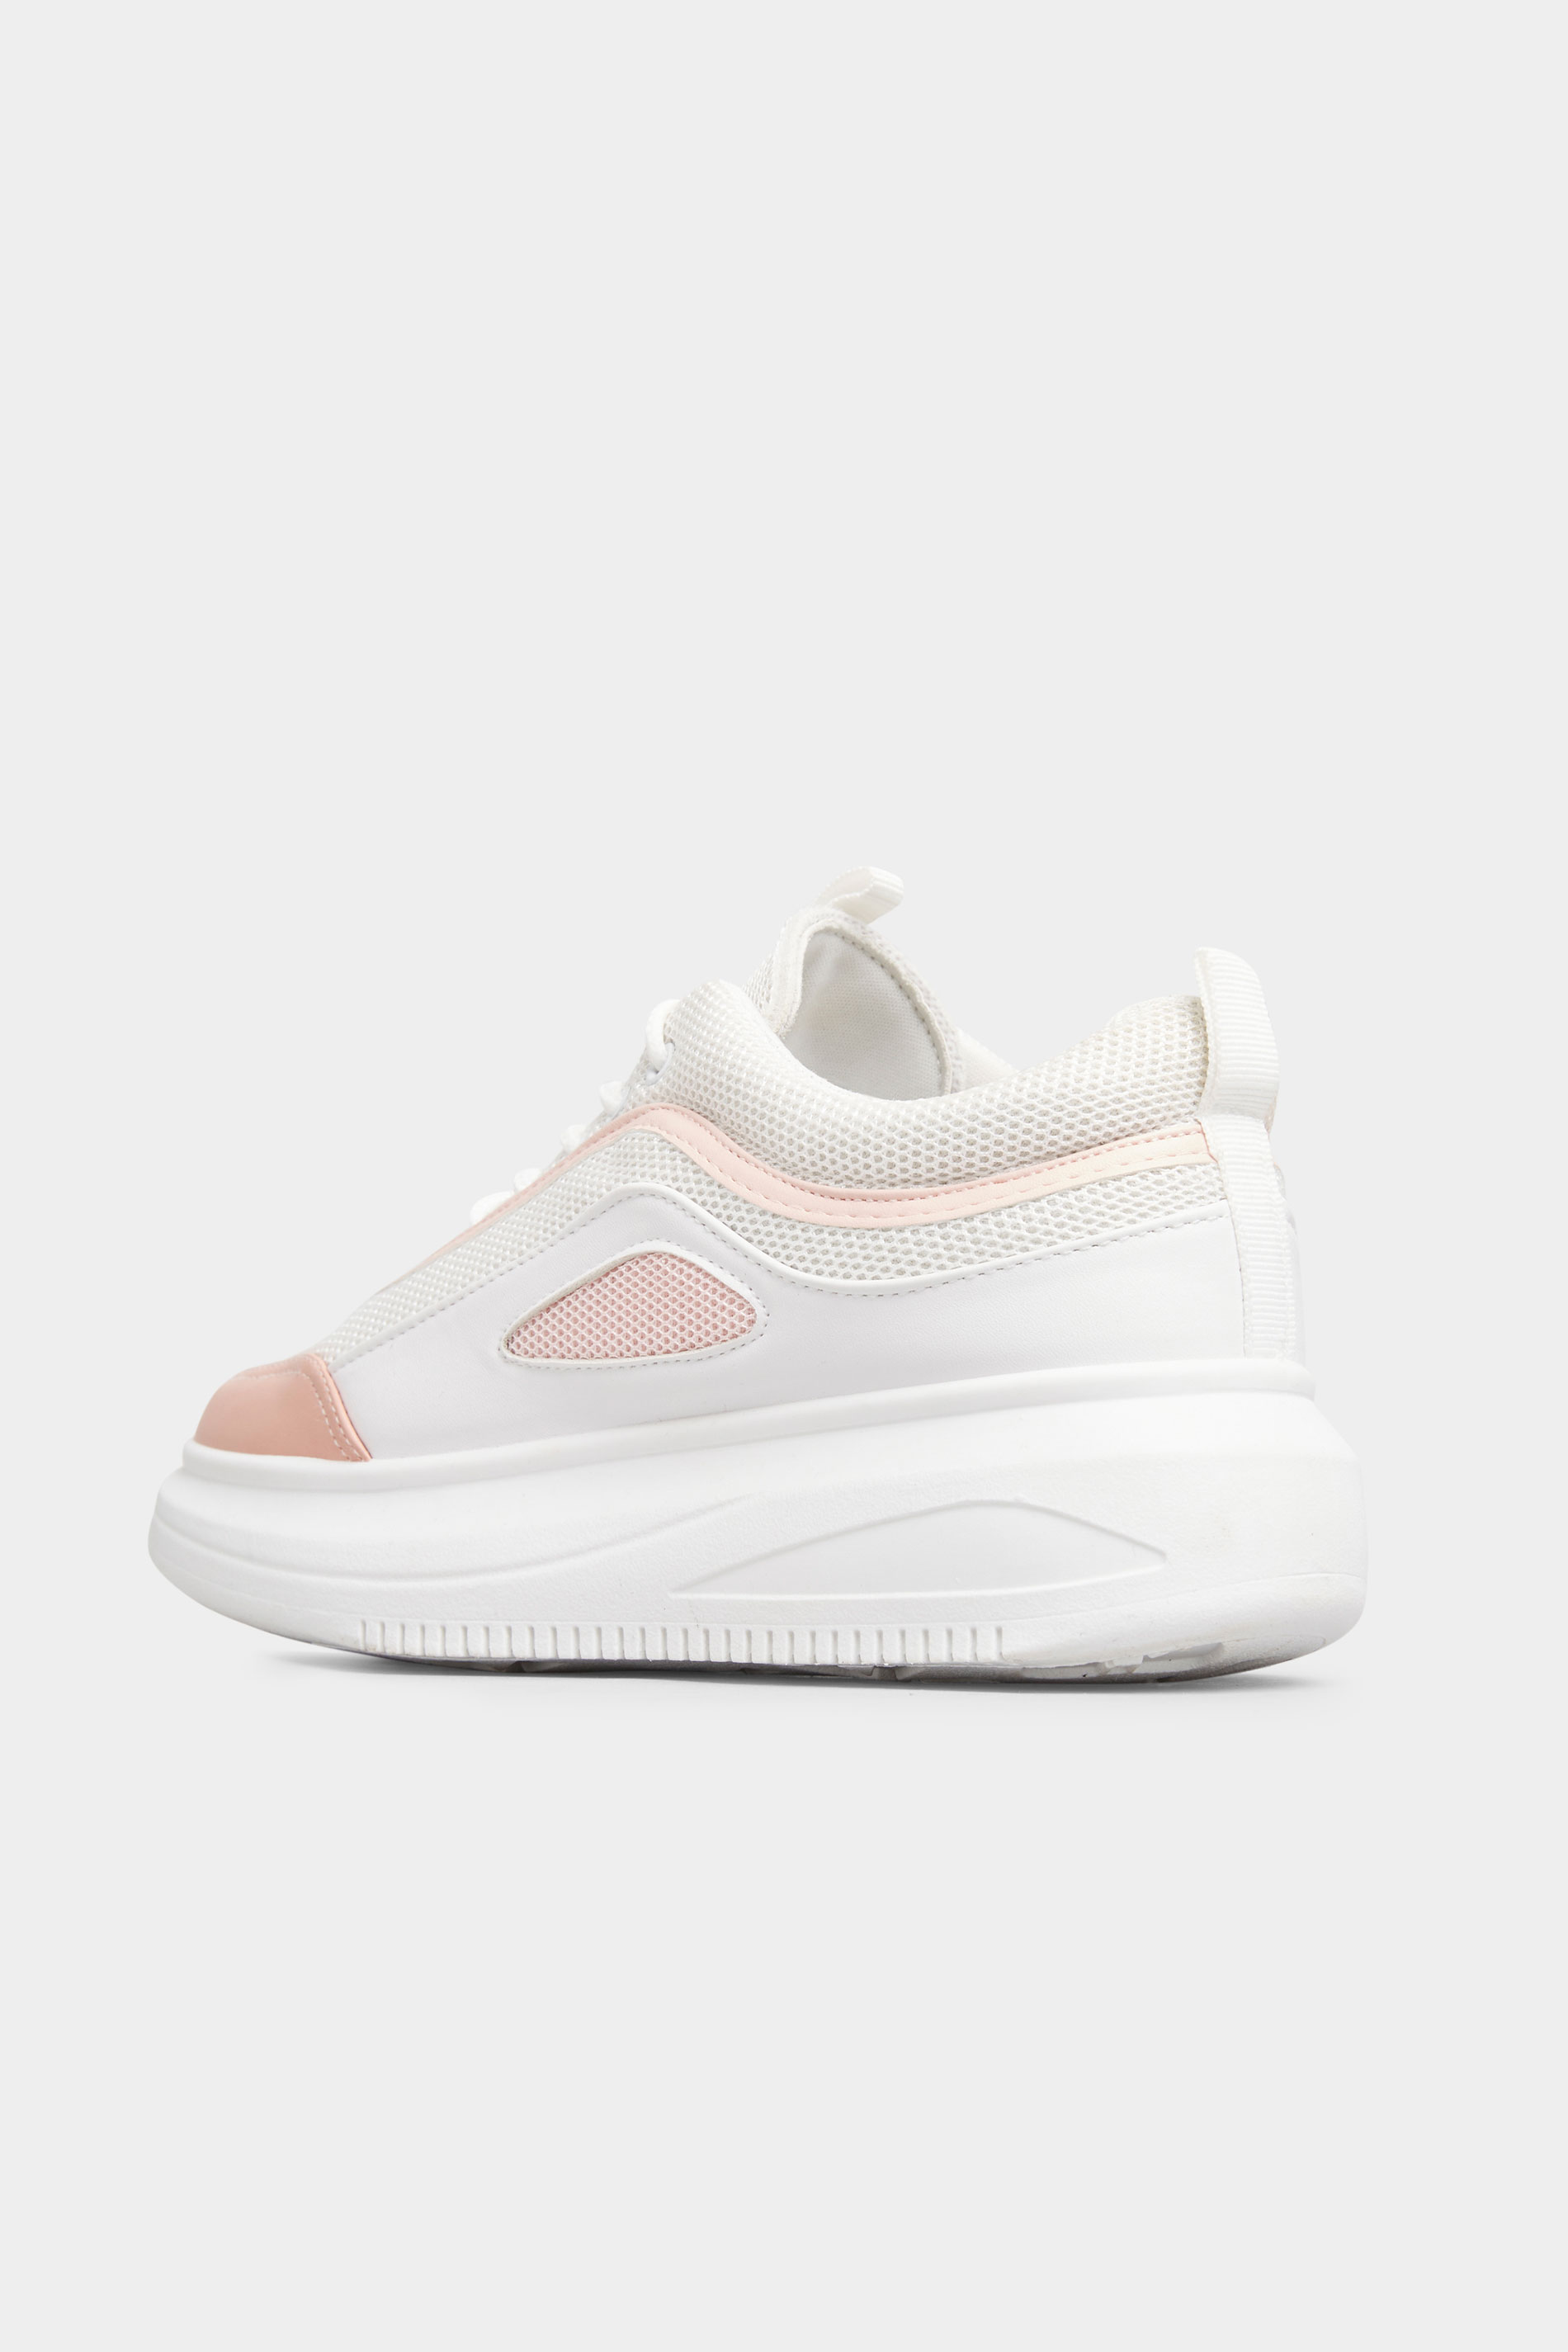 LIMITED COLLECTION White & Pink Platform Sporty Trainers In Regular Fit ...